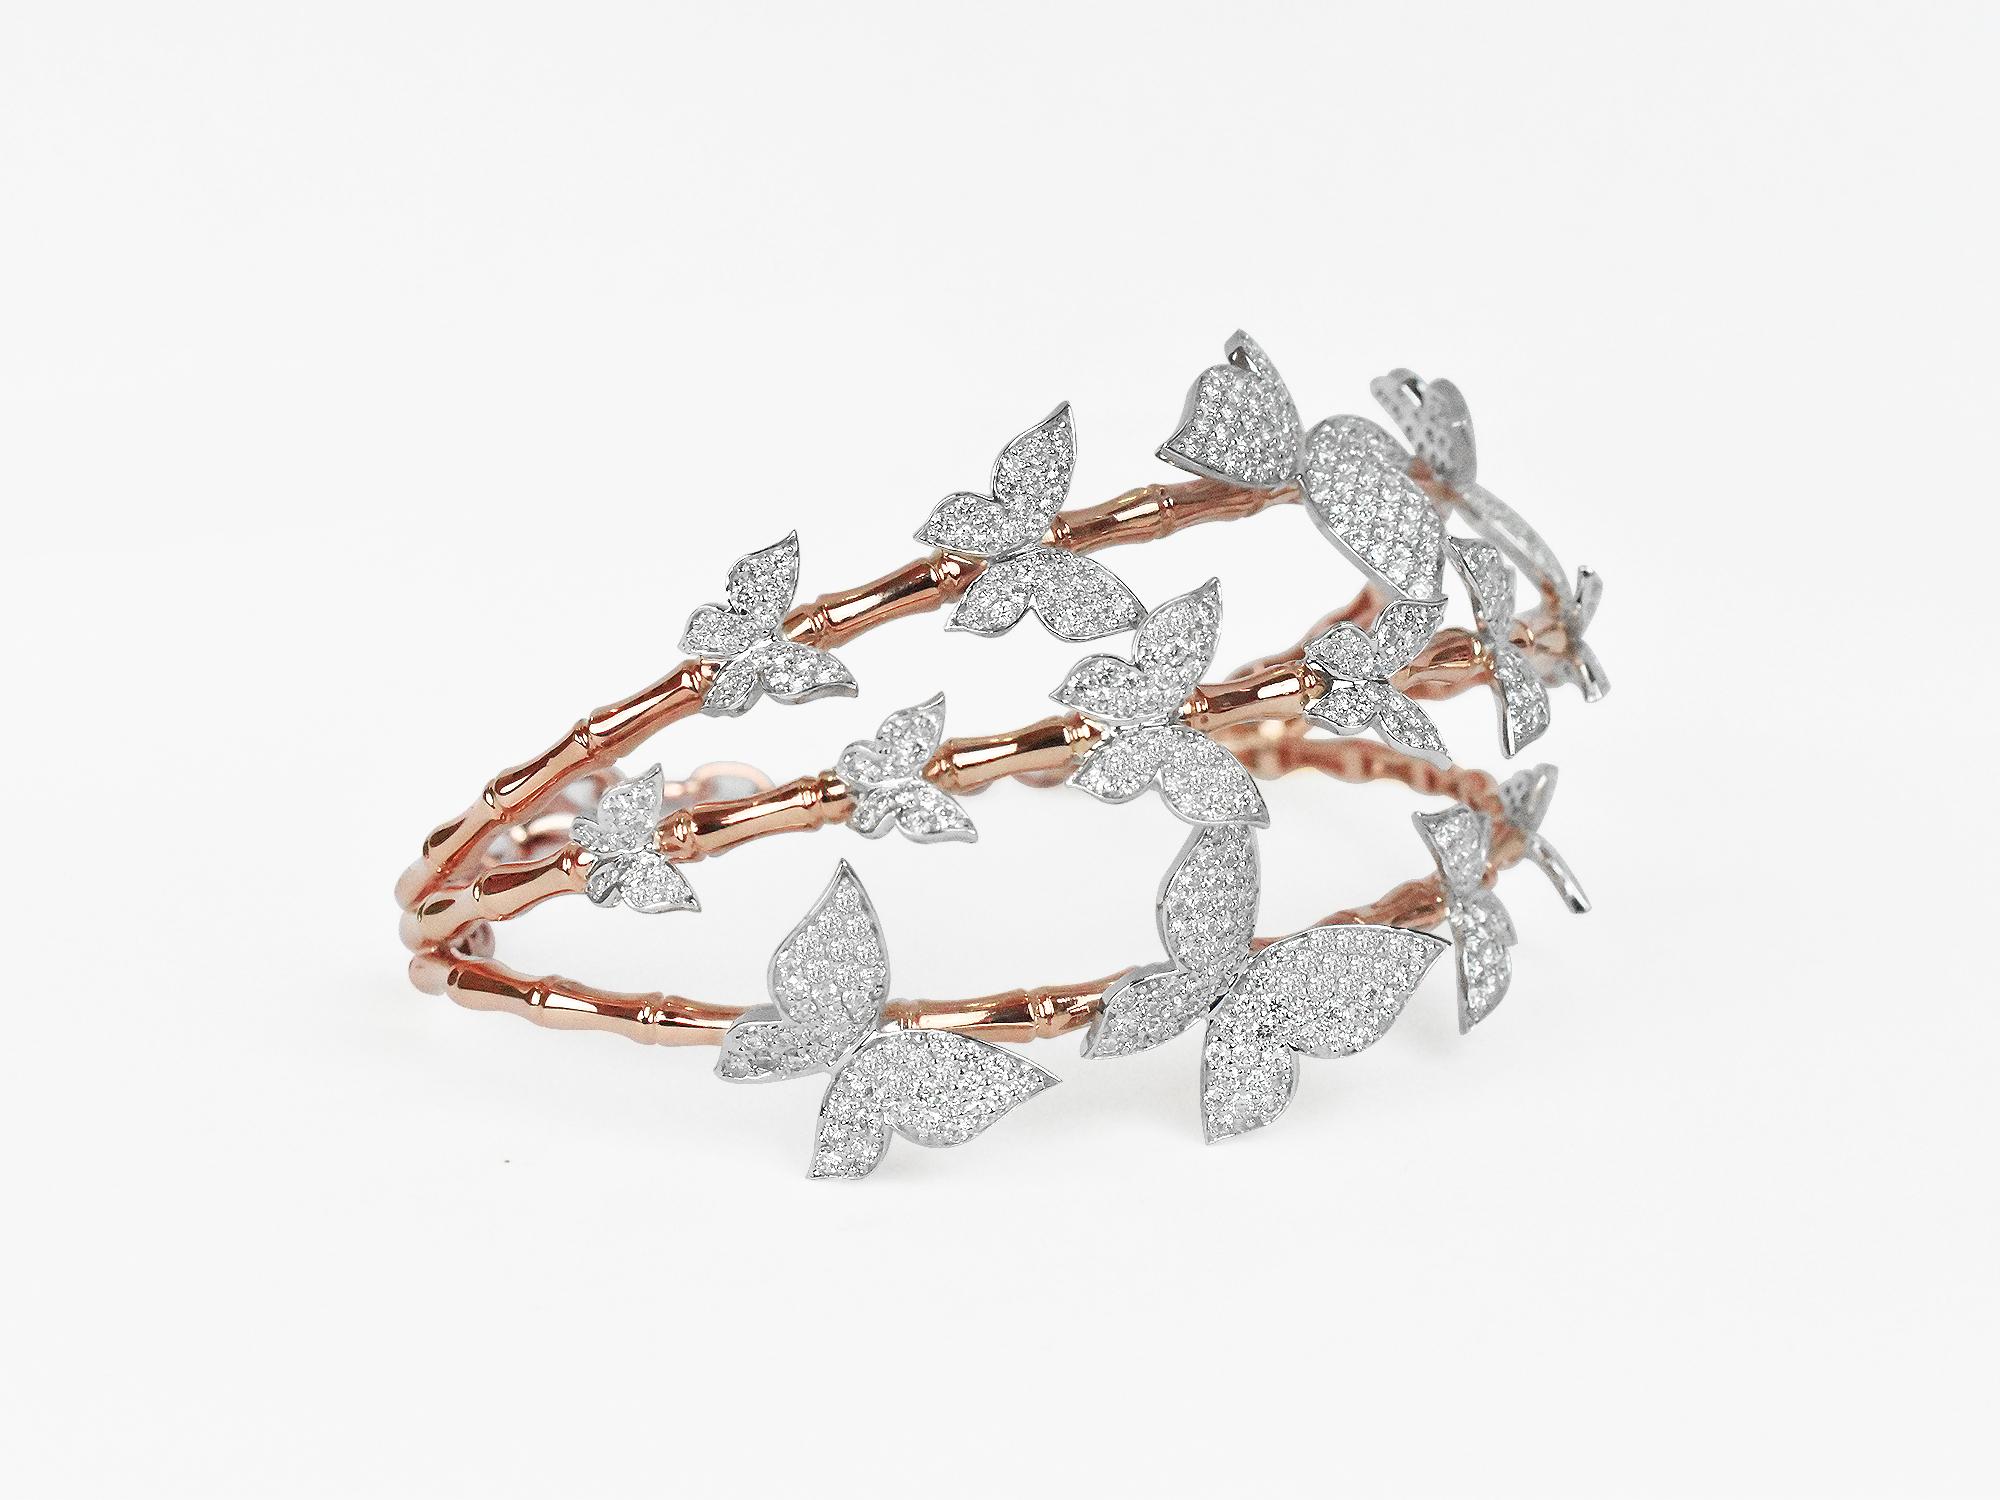 18Karat Gold Two Tone Rose Gold White Gold Diamonds Pave Butterfly Fashion Bangle Bracelet.

        This 18K solid gold,  2 Tone ( Rose Gold & White Gold) cuff bangle made with a secure Lobster Clasp. A strong piece of jewelry for years, decades &